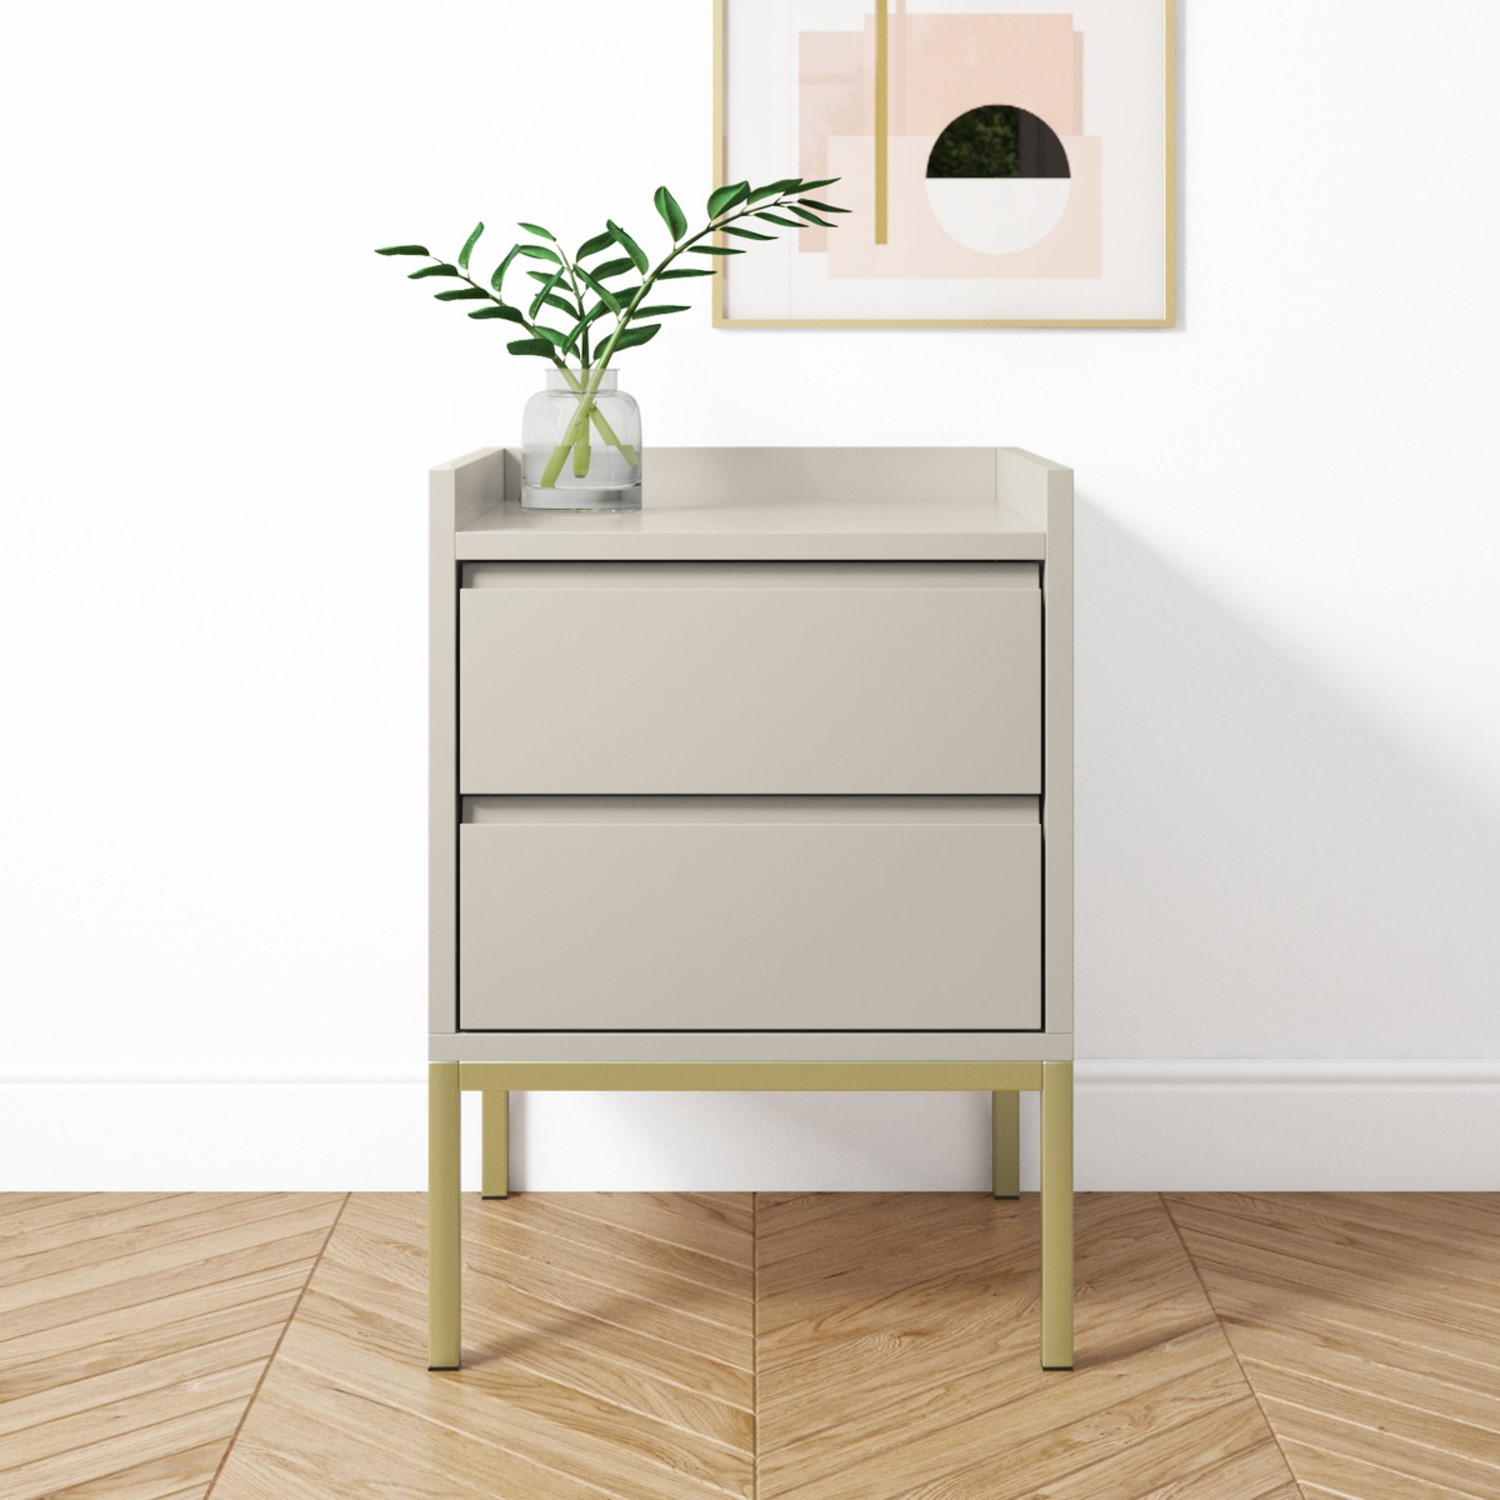 Photo of Beige modern 2 drawer bedside table with legs - zion